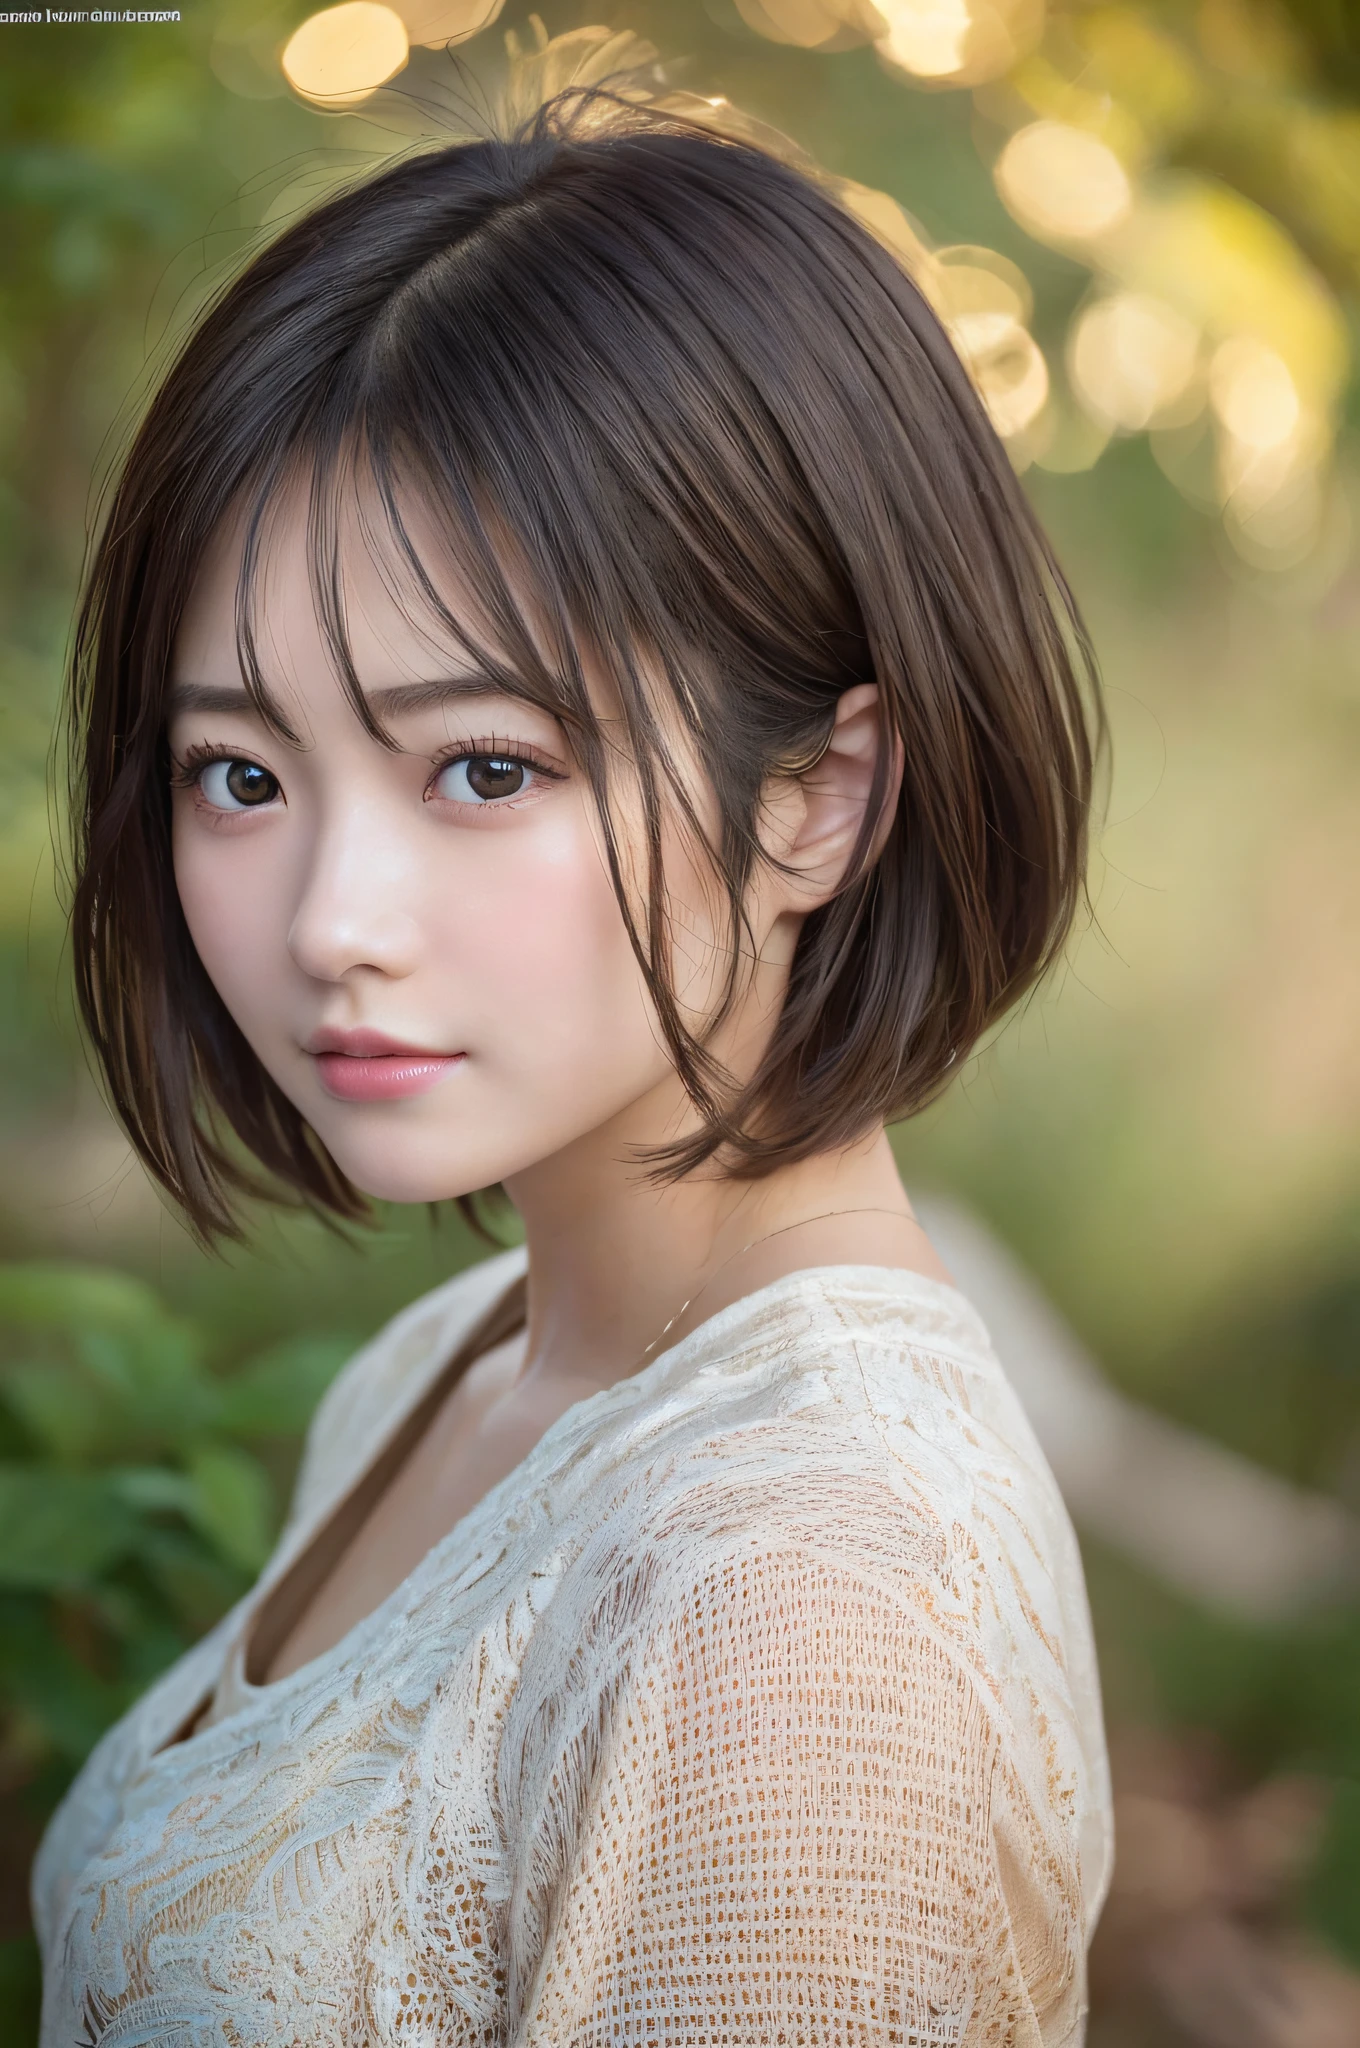 (Masterpiece: 1.3), (8k, photorealistic, RAW photo, best quality: 1.4), (1girl), Japan person, 22 years old, beautiful face, (realistic face), (black hair, short hair: 1.3), beautiful hairstyle, realistic eyes, beautiful detail eyes, (realistic skin), beautiful skin, absurdity, attractive, ultra high resolution, ultra realistic, high definition, golden ratio